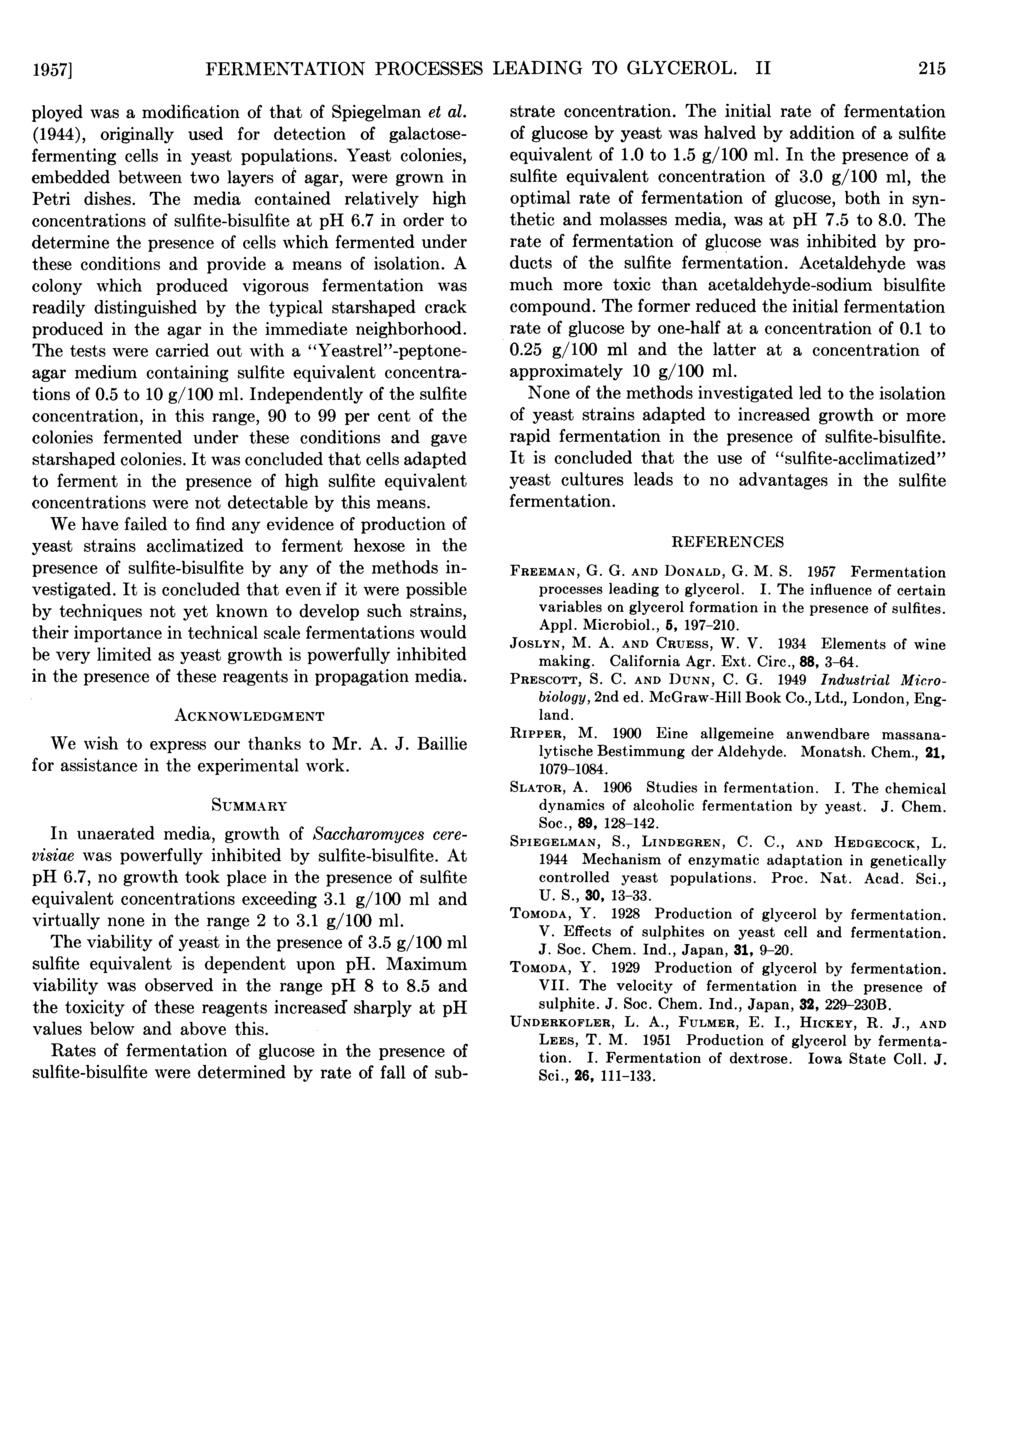 1957] FERMENTATION PROCESSES LEADING TO GLYCEROL. II 215 ployed was a modification of that of Spiegelman et al. (1944), originally used for detection of galactosefermenting cells in yeast populations.